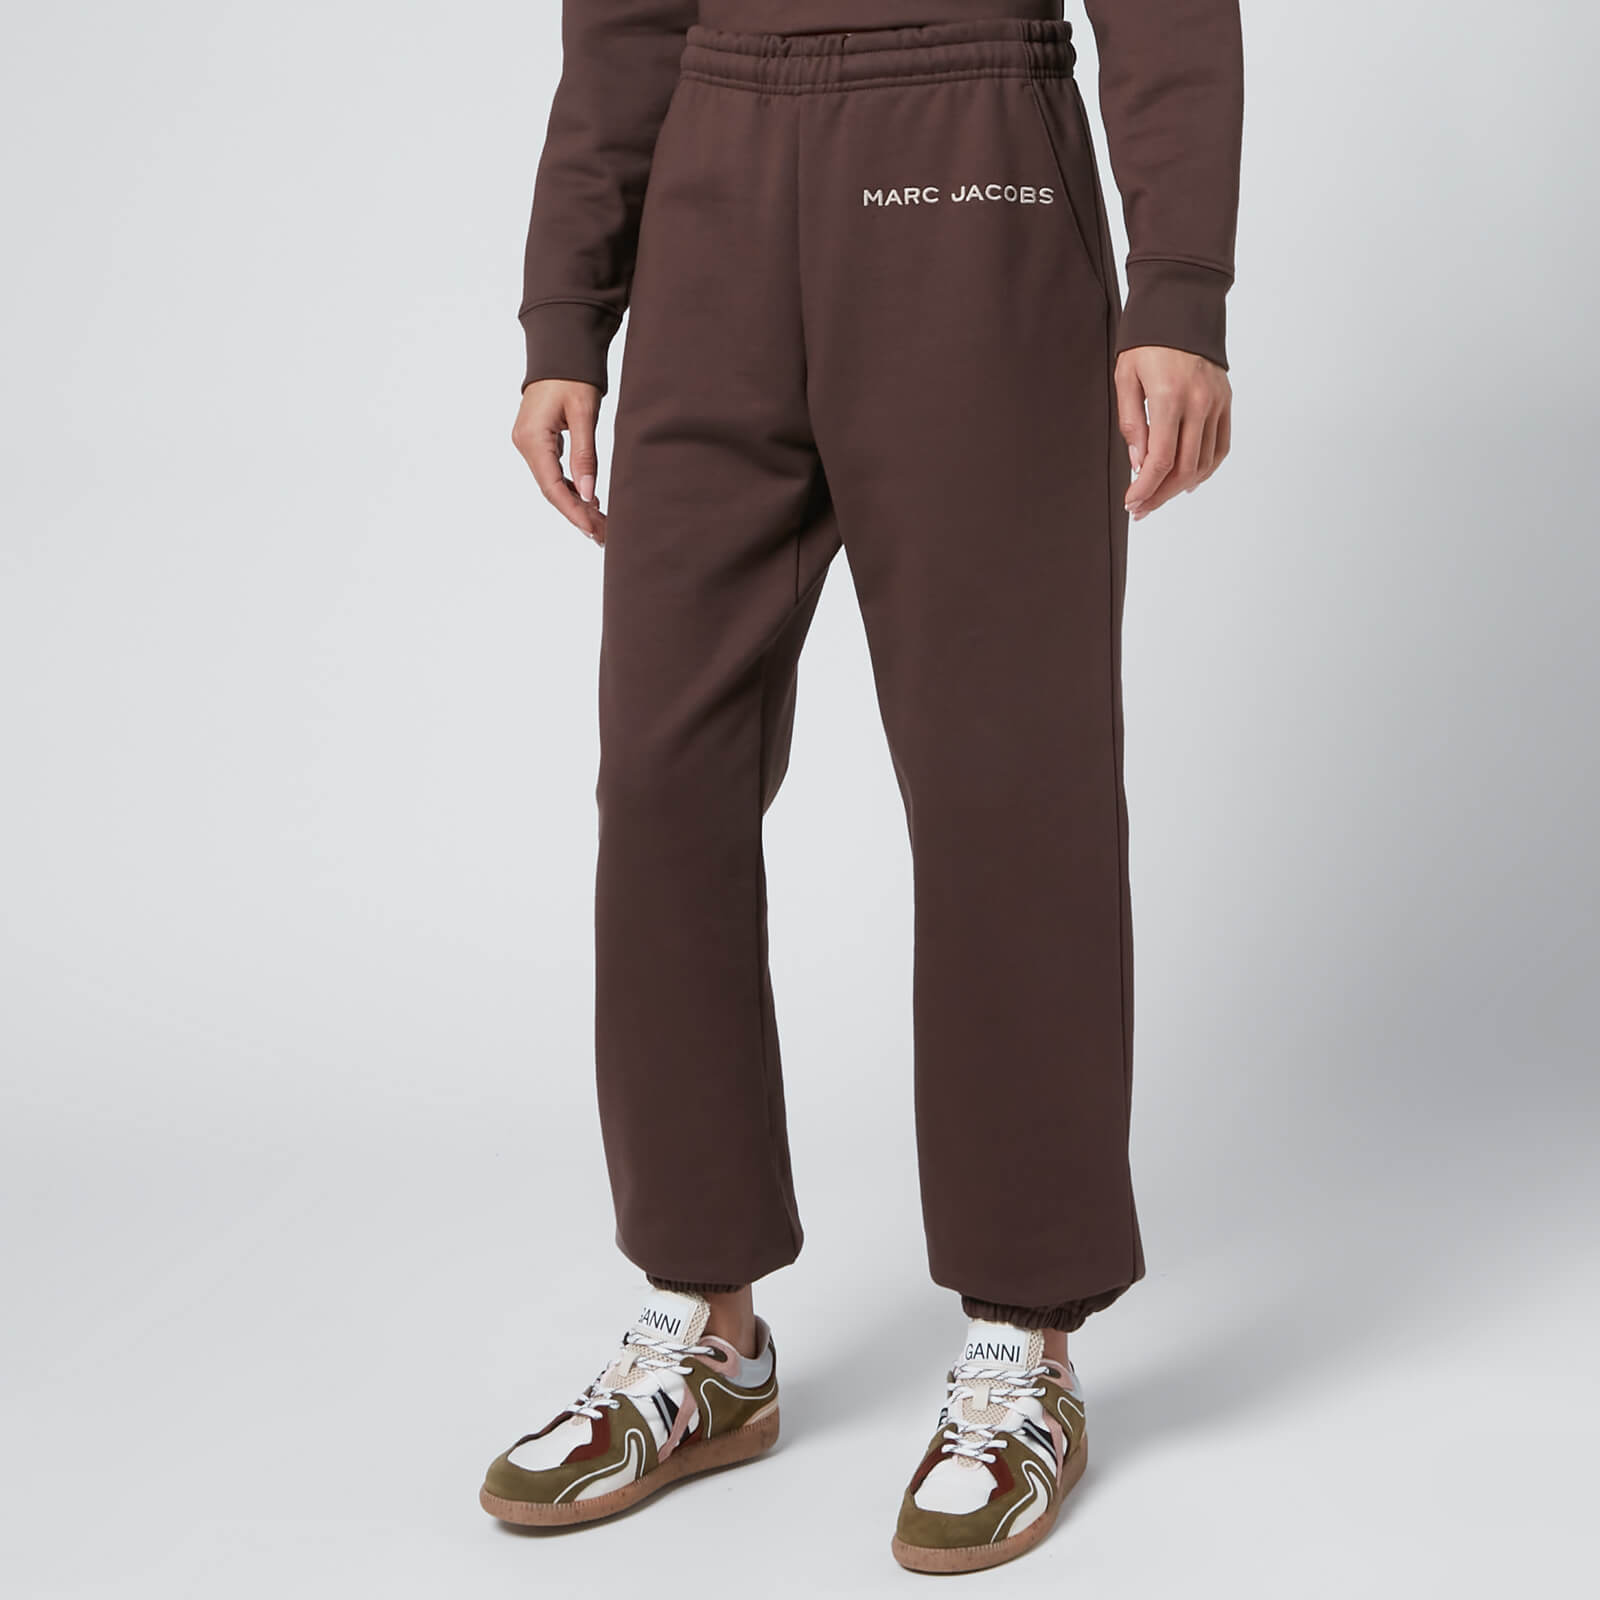 Marc Jacobs Women's The Sweatpants - Shaved Chocolate - M